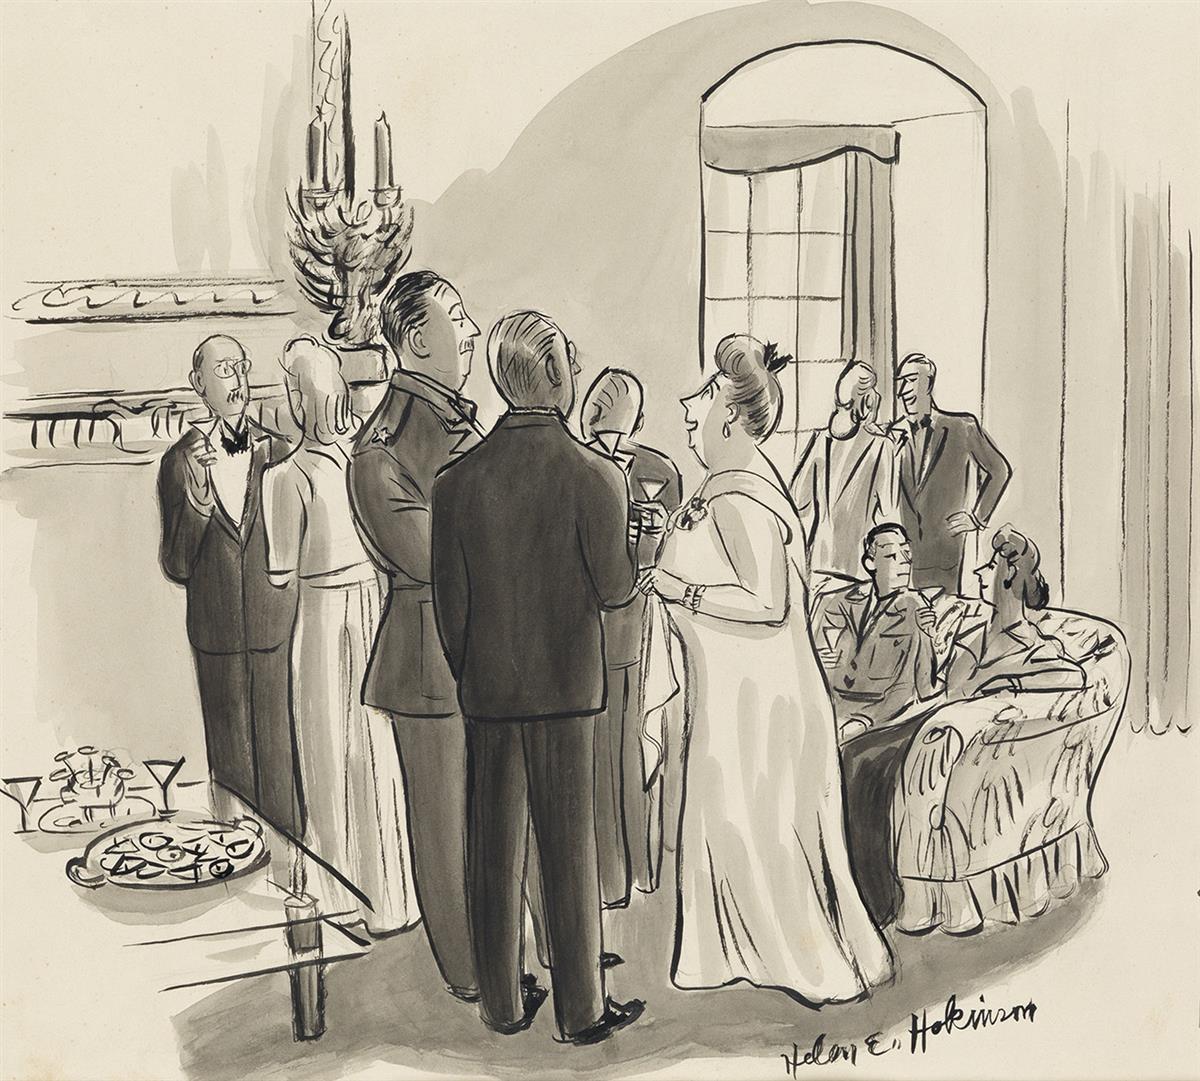 HELEN HOKINSON. (THE NEW YORKER / CARTOON) May I ask you a very rude question? Just what is a burp gun?